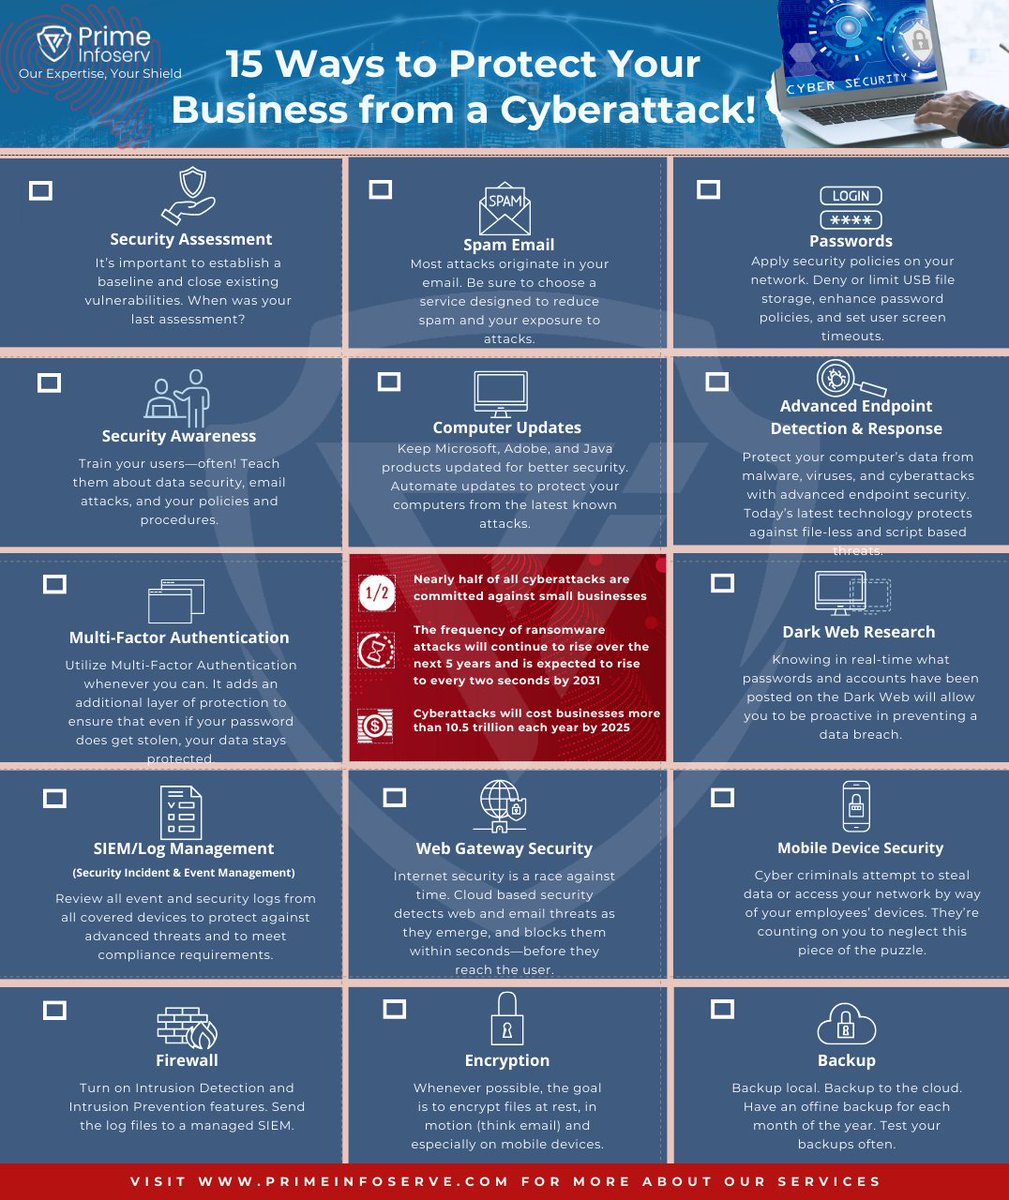 15 Ways to Protect Your Business from a Cyber Attack 

Check the vlog for detailed steps - zurl.co/4dwF 

 #prime #primeinfoserv #cybersecurity #dataprotection #waytoprotectdata